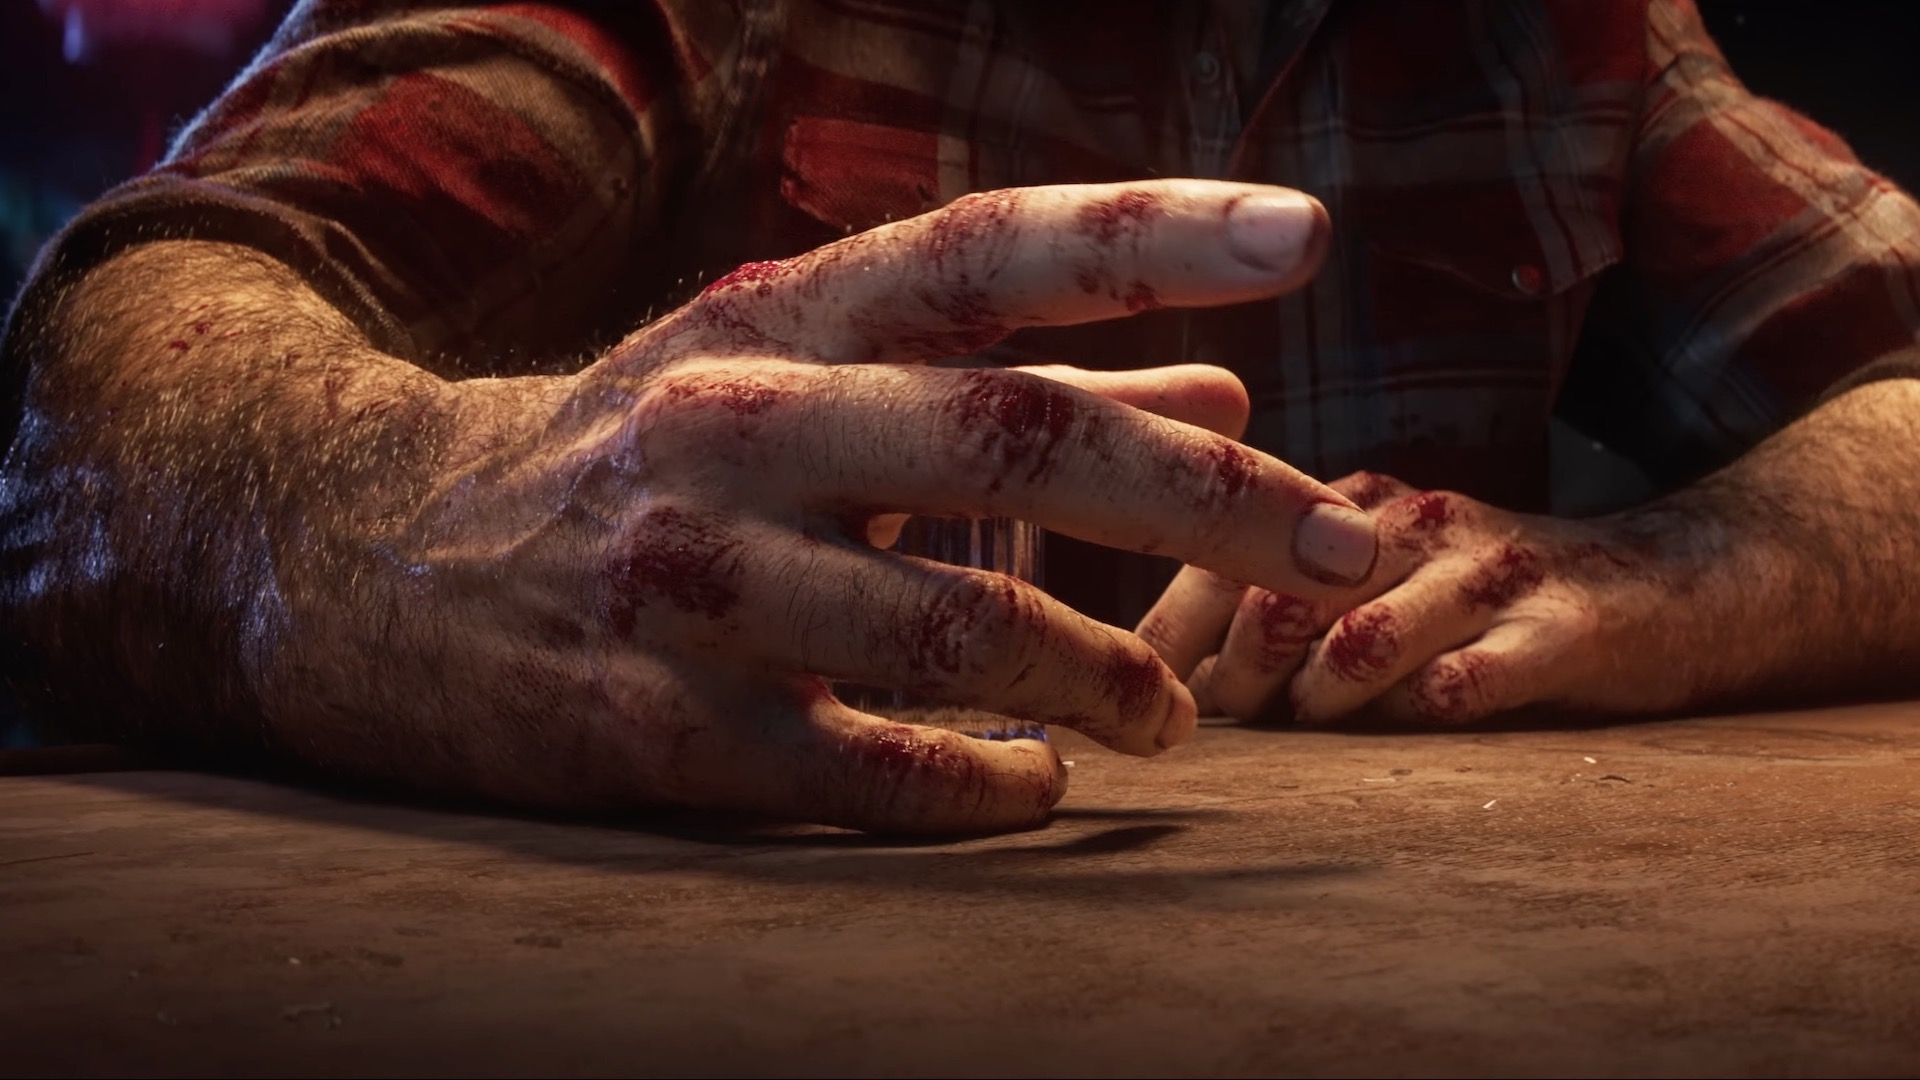 A close up of Wolverine's hands